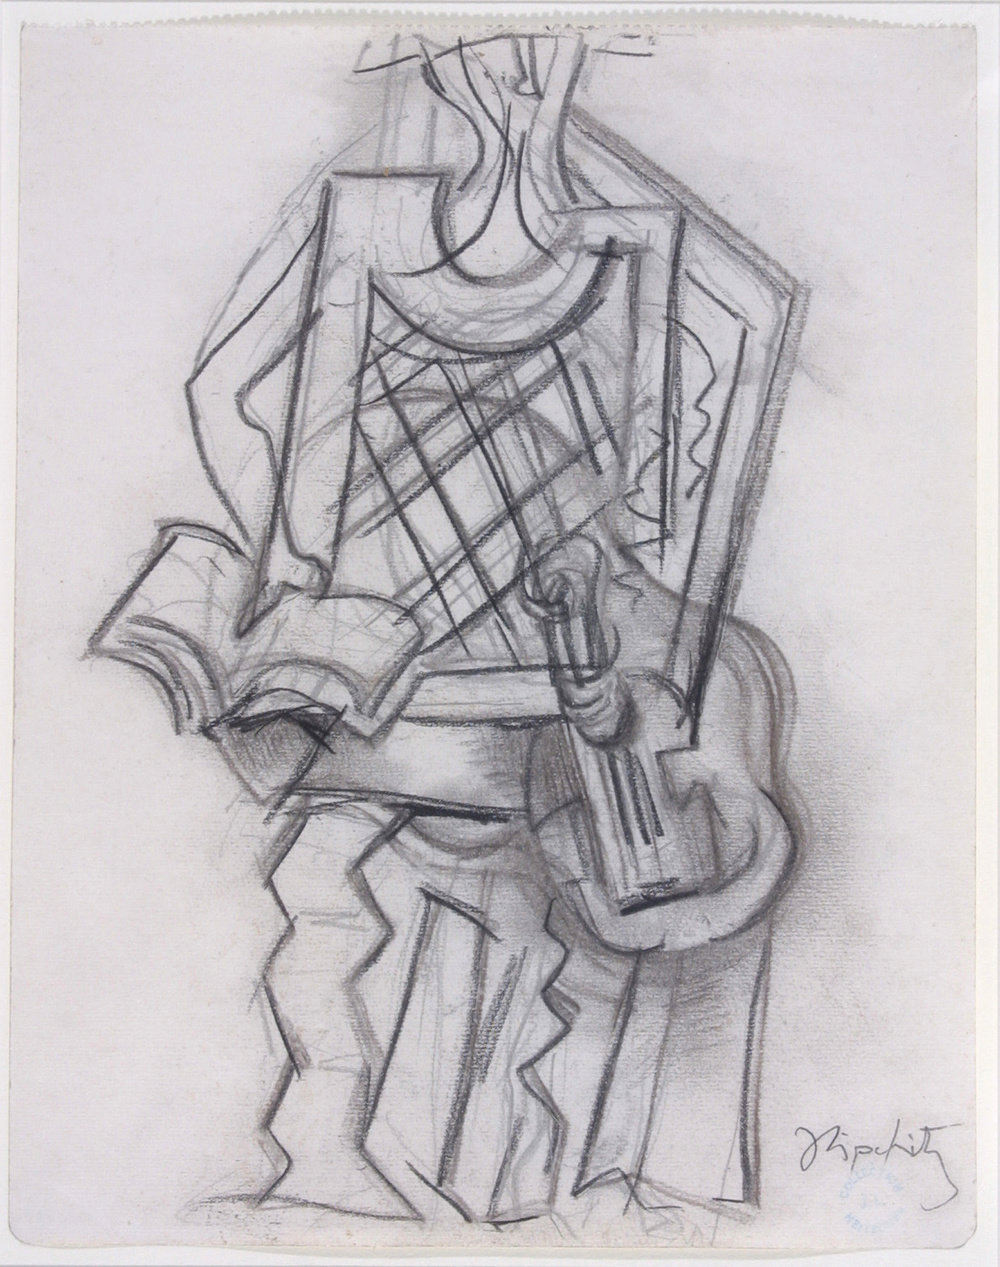 Study for a transparency (harlequin 1926), 1926, charcoal on paper, nos 47.010